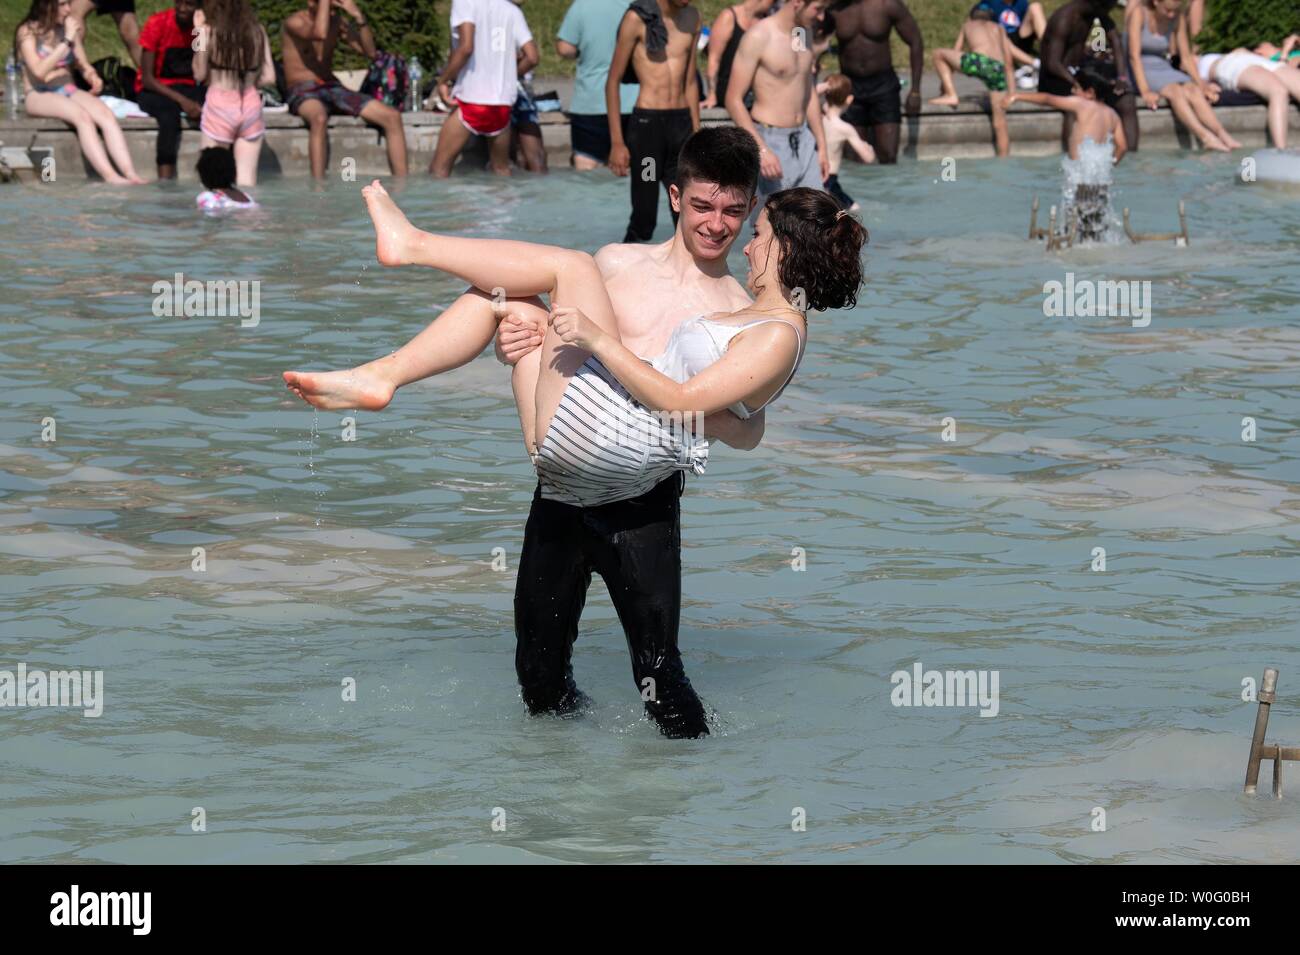 Paris, France. 26th June, 2019. People cool themselves at the fountain near Trocadero Square in Paris, France, June 26, 2019. A high-pressure system bringing hot air up from the Sahara is making temperatures climb to unusually level in France where hotspots of up to 40 degrees Celsius are forecast to hit Paris and most French cities this week, forcing the government to raise vigilance and trigger heatwave alert system. Credit: Jack Chan/Xinhua/Alamy Live News Stock Photo